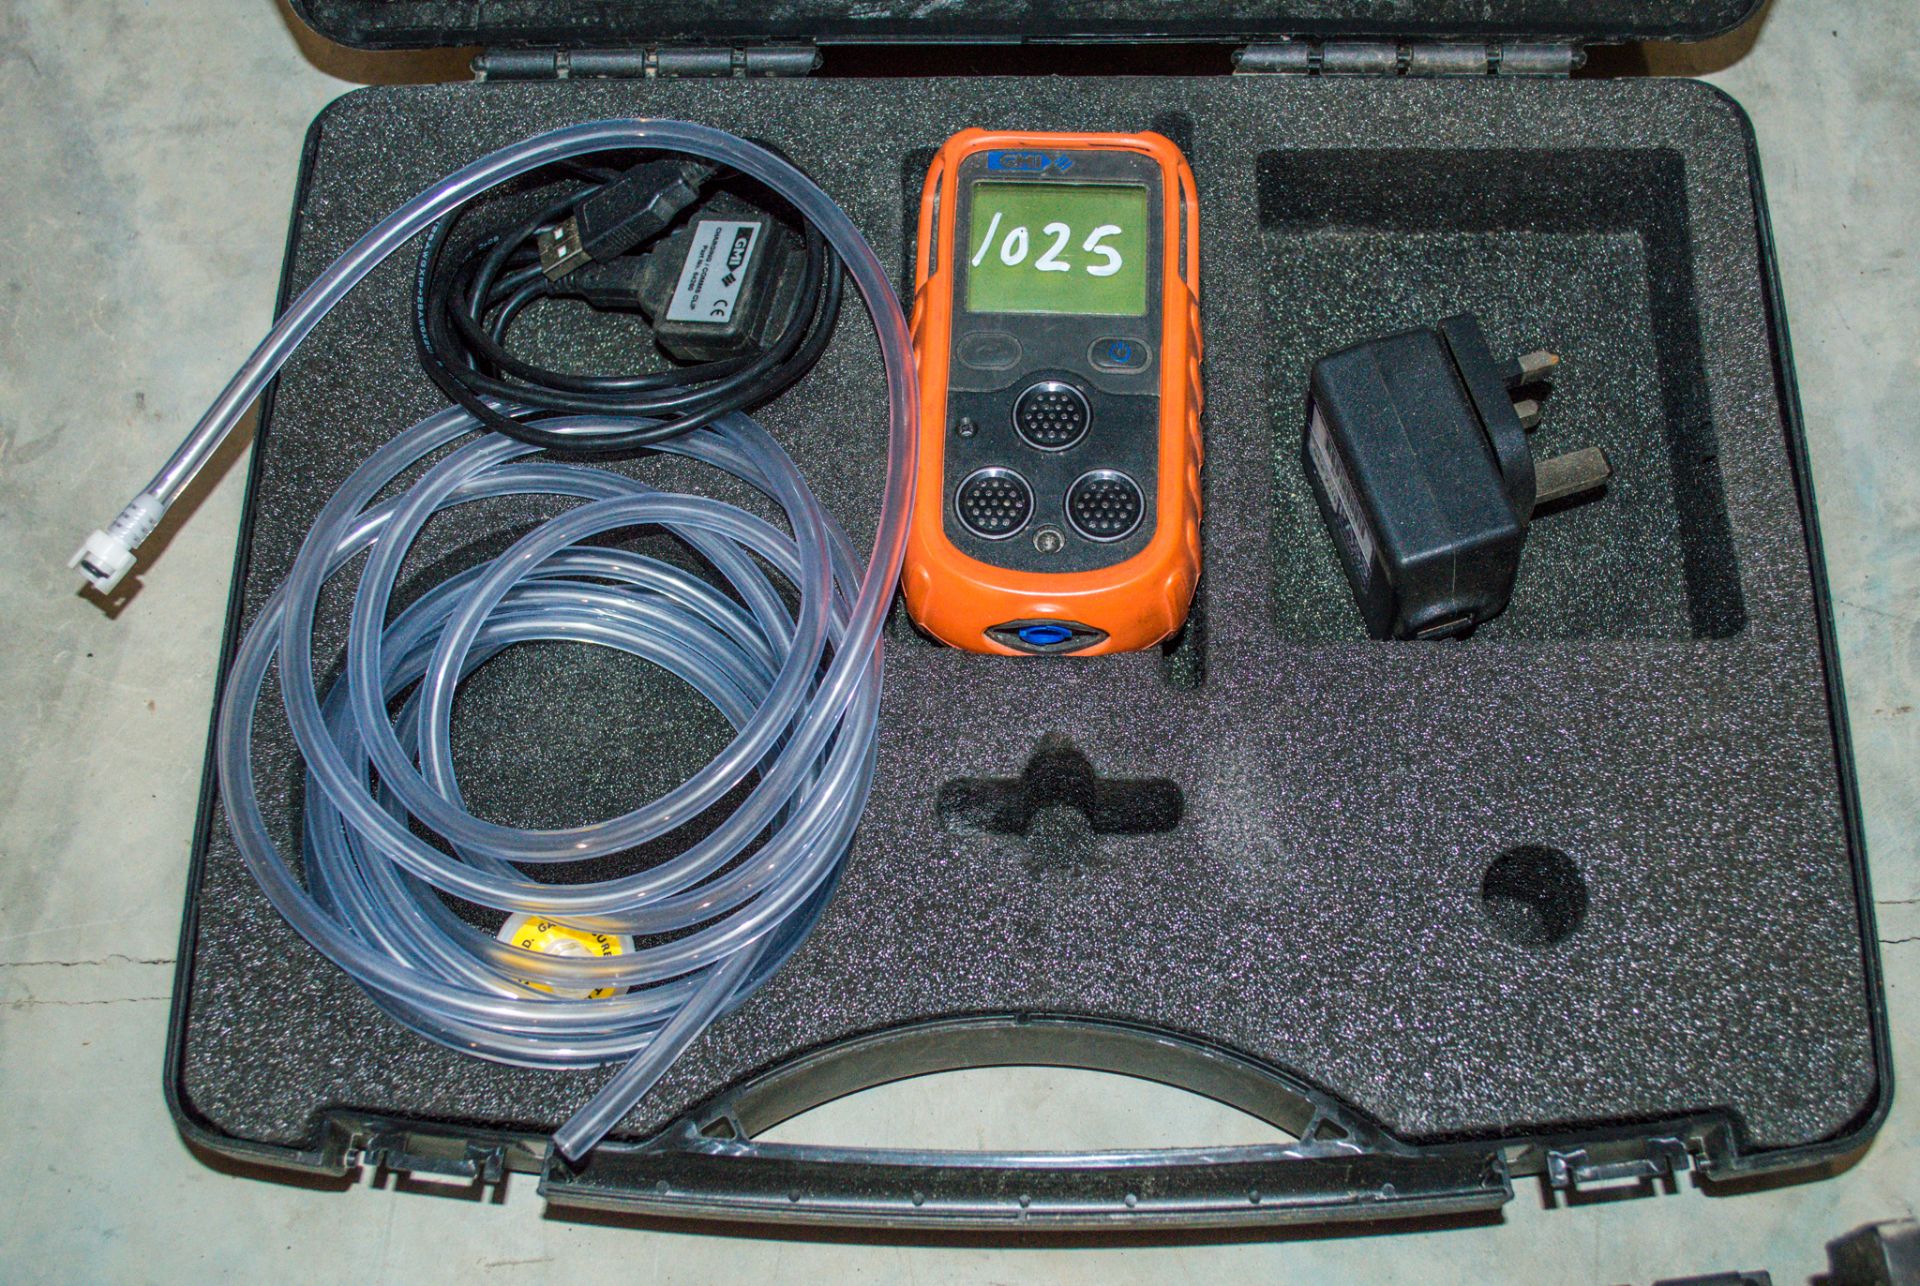 CMI Gas detection kitC/w charger and carry caseLM903114